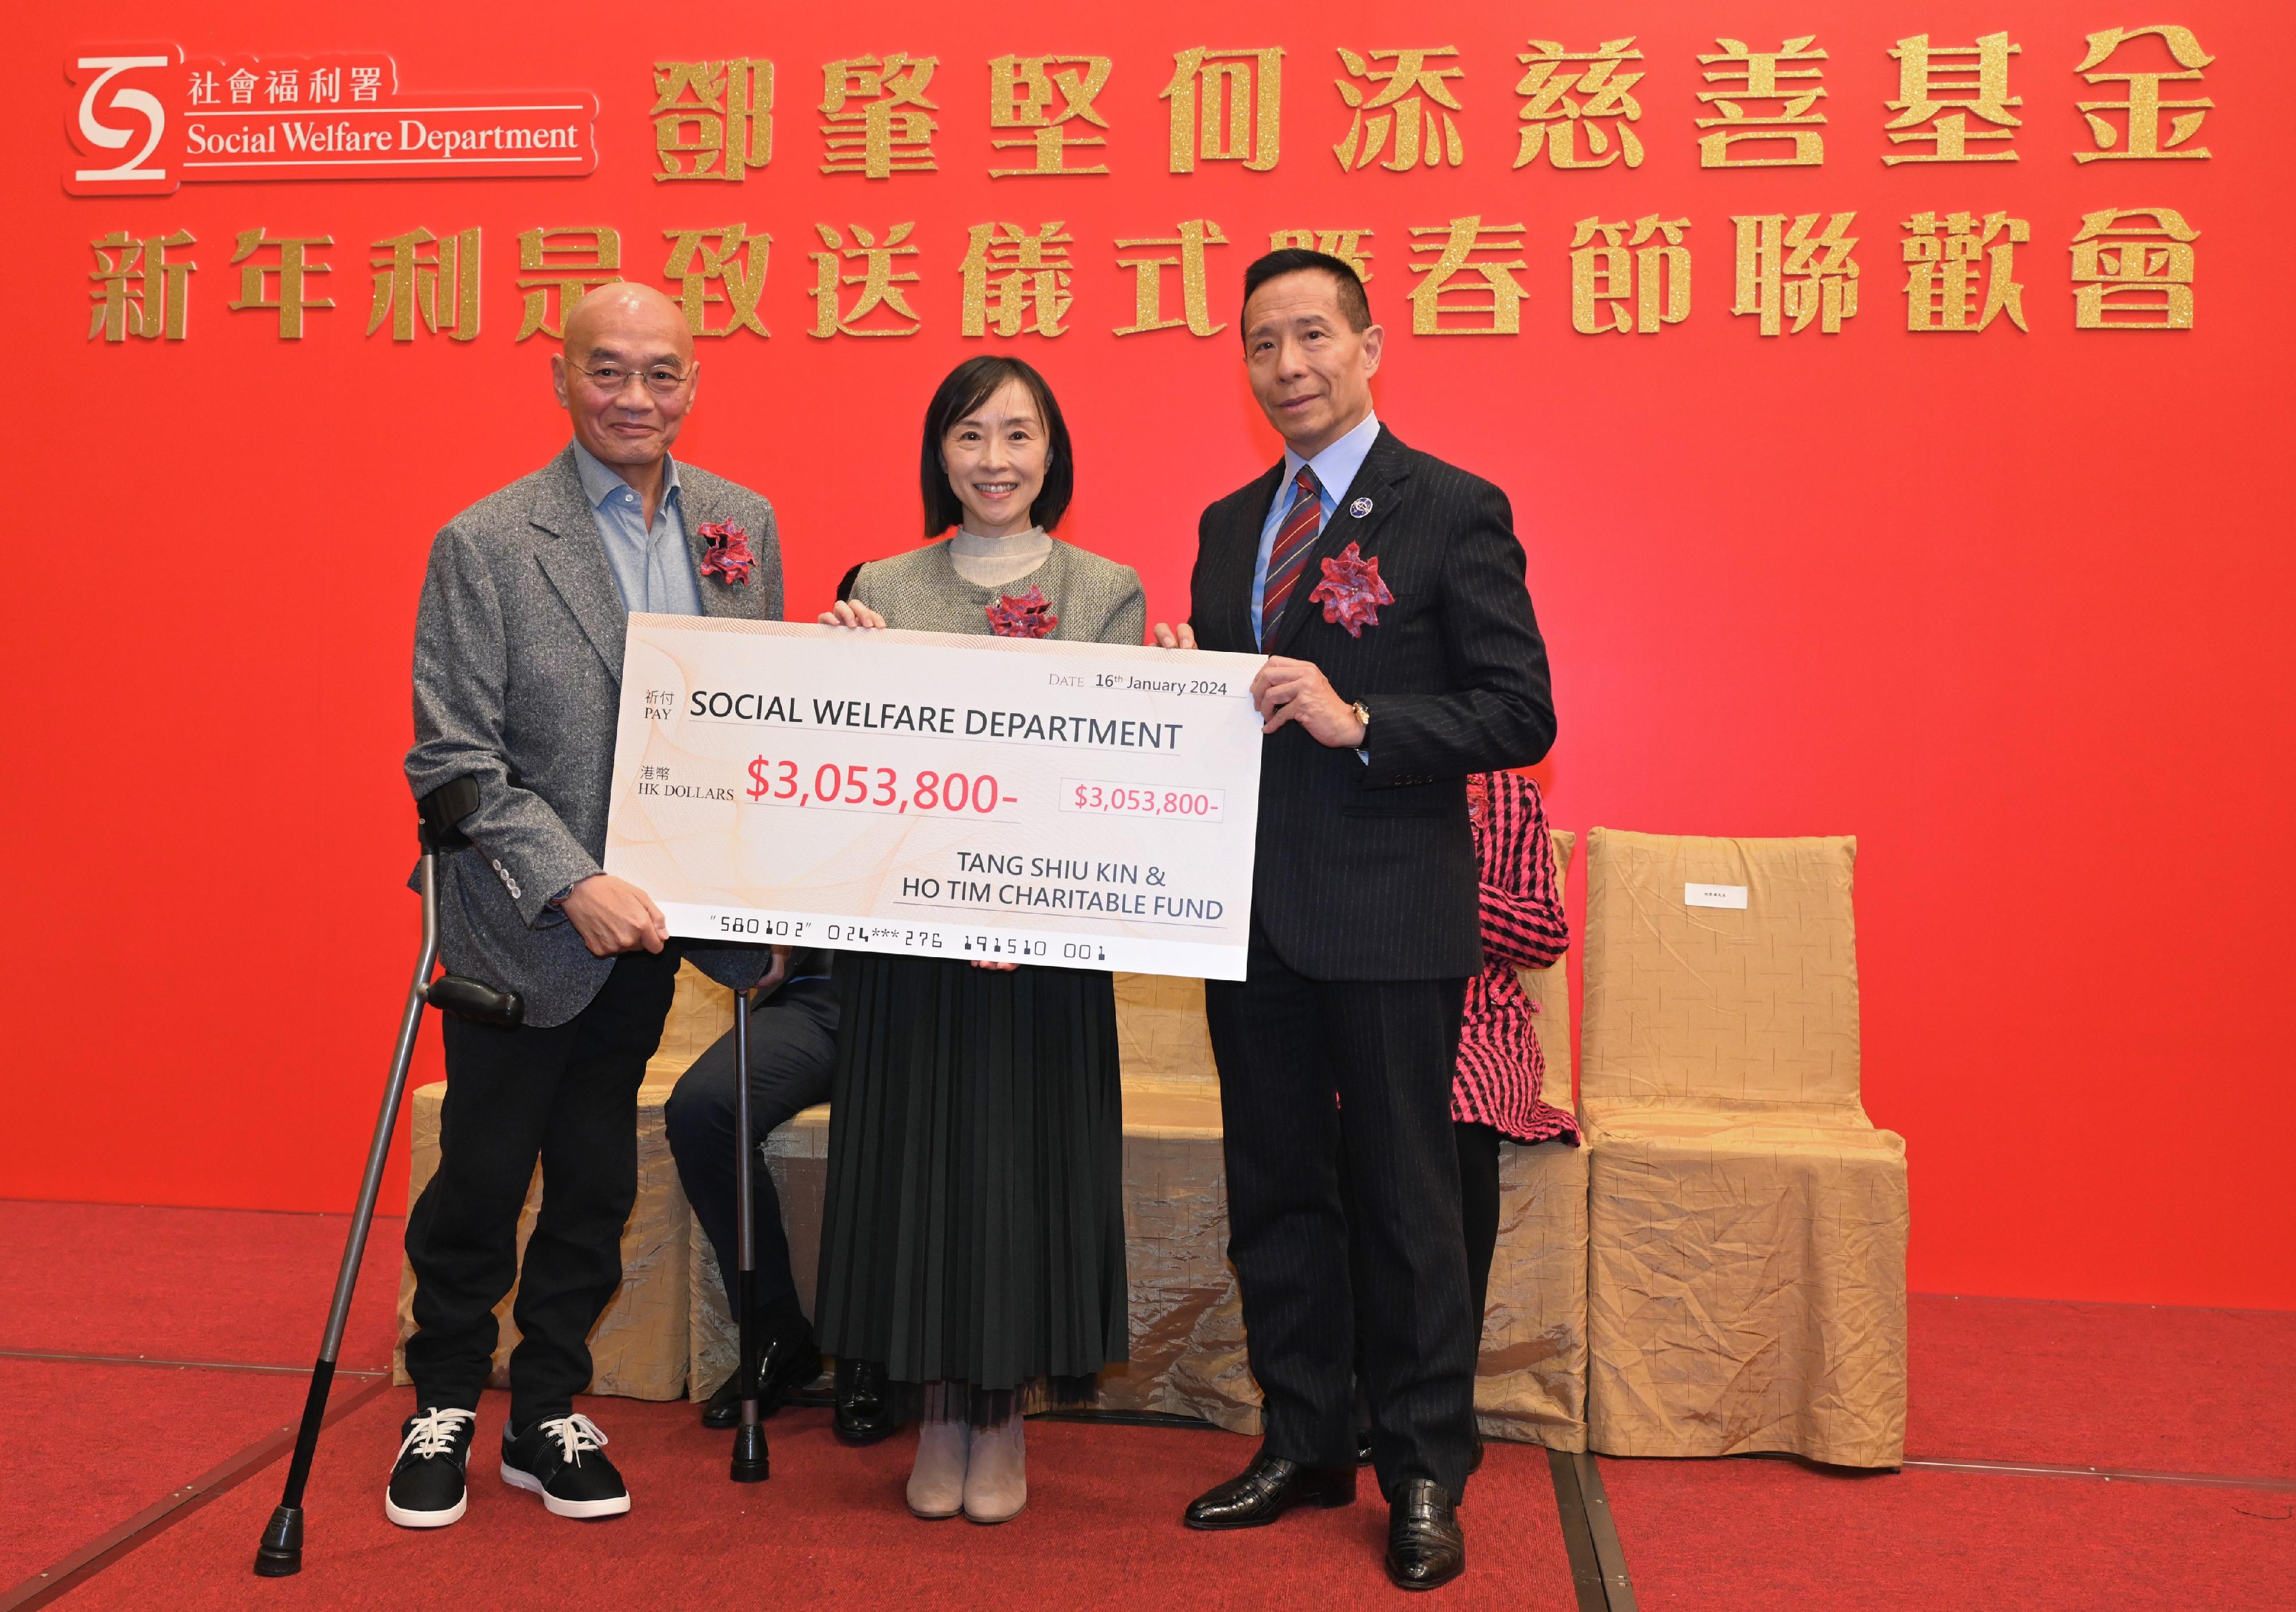 The Social Welfare Department and the Management Committee of the Tang Shiu Kin and Ho Tim Charitable Fund (the Fund) today (January 16) hosted a spring reception for the elderly and presented lai see packets to them in celebration of the upcoming Lunar New Year. Photo shows the Director of Social Welfare, Miss Charmaine Lee (centre), receiving a cheque from the advisors to the Fund, Mr Richard Tang (right) and Mr Hamilton Ho (left).